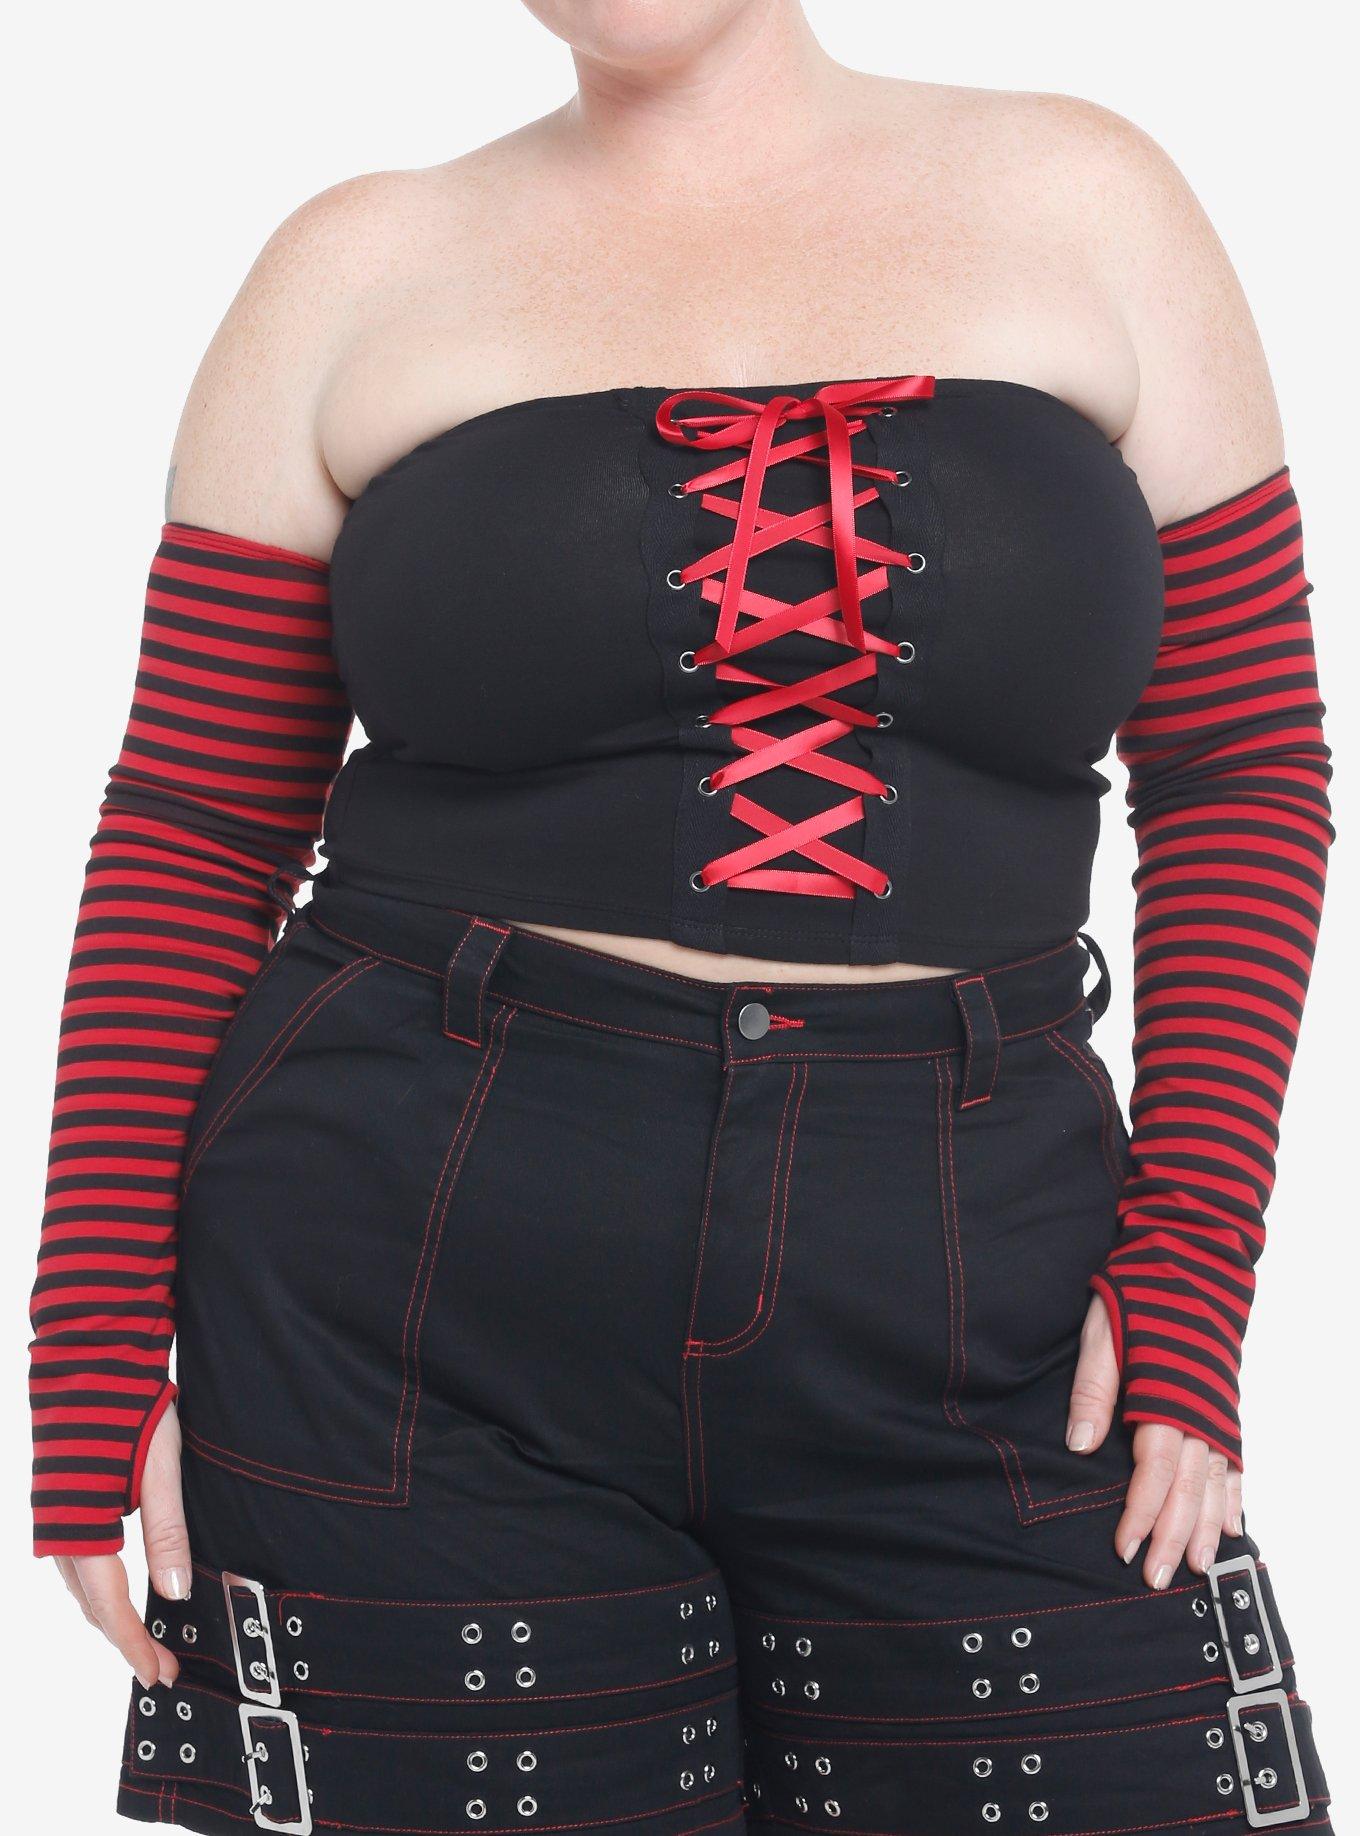 Red & Black Tube Top With Stripe Arm Warmers Plus Size, STRIPE - RED, hi-res